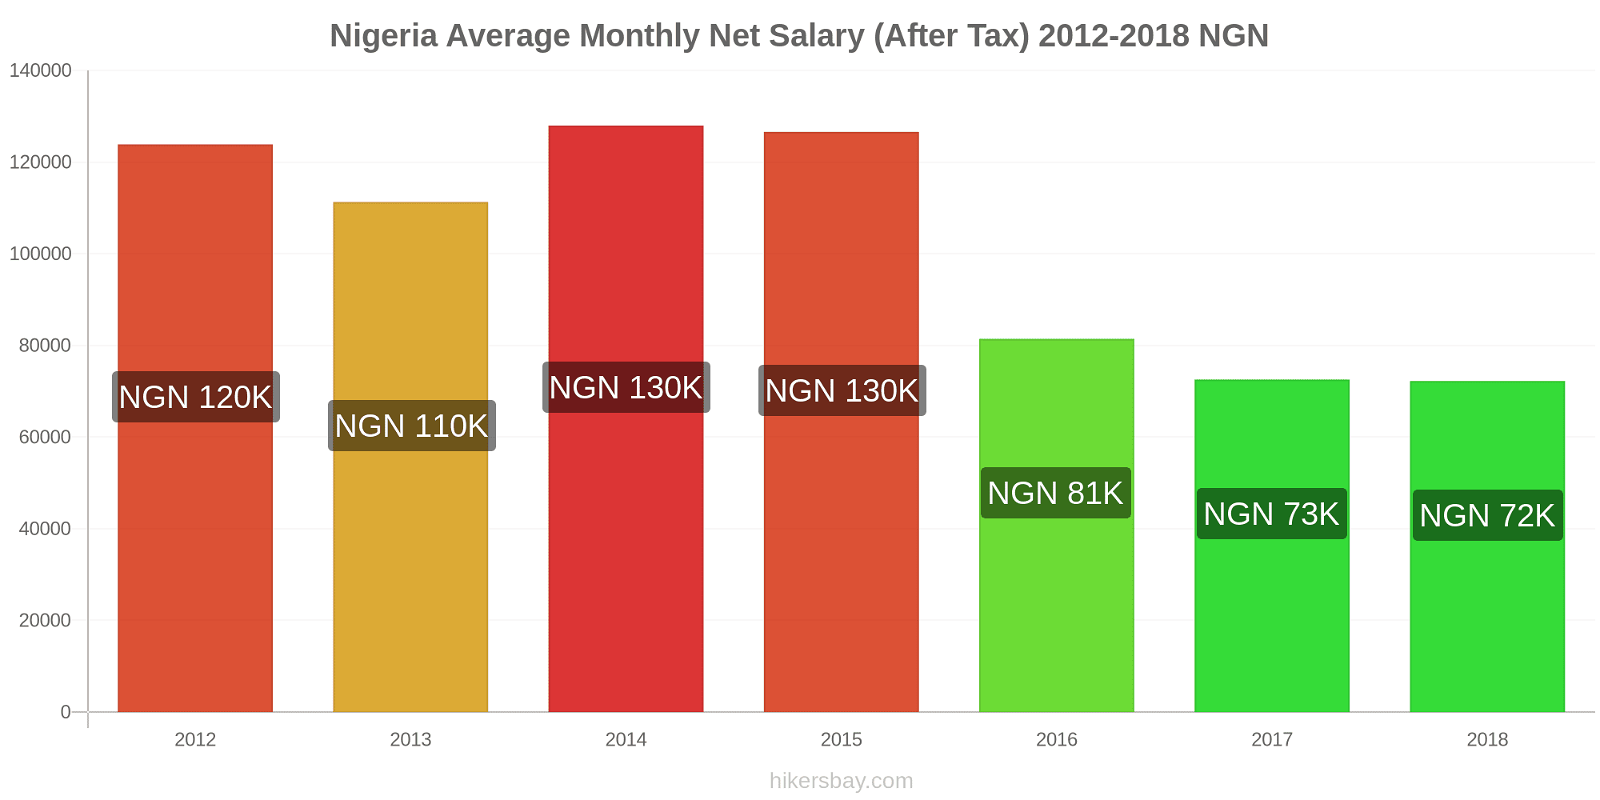 Nigeria price changes Average Monthly Net Salary (After Tax) hikersbay.com